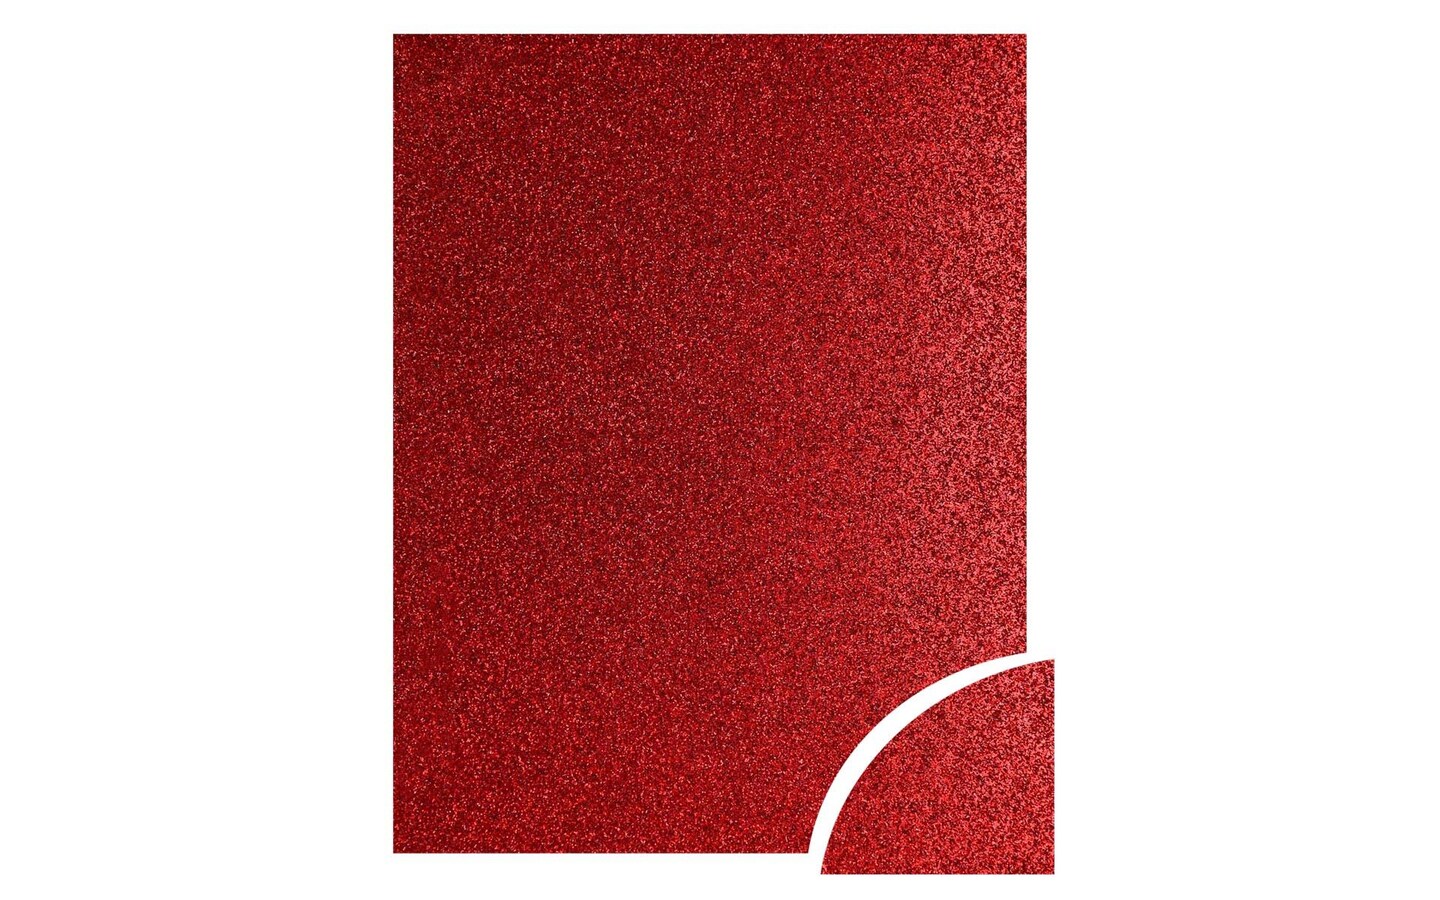 PA Paper Accents Glitter Cardstock 22&#x22; x 28&#x22; Red, 85lb colored cardstock paper for card making, scrapbooking, printing, quilling and crafts, 10 piece pack